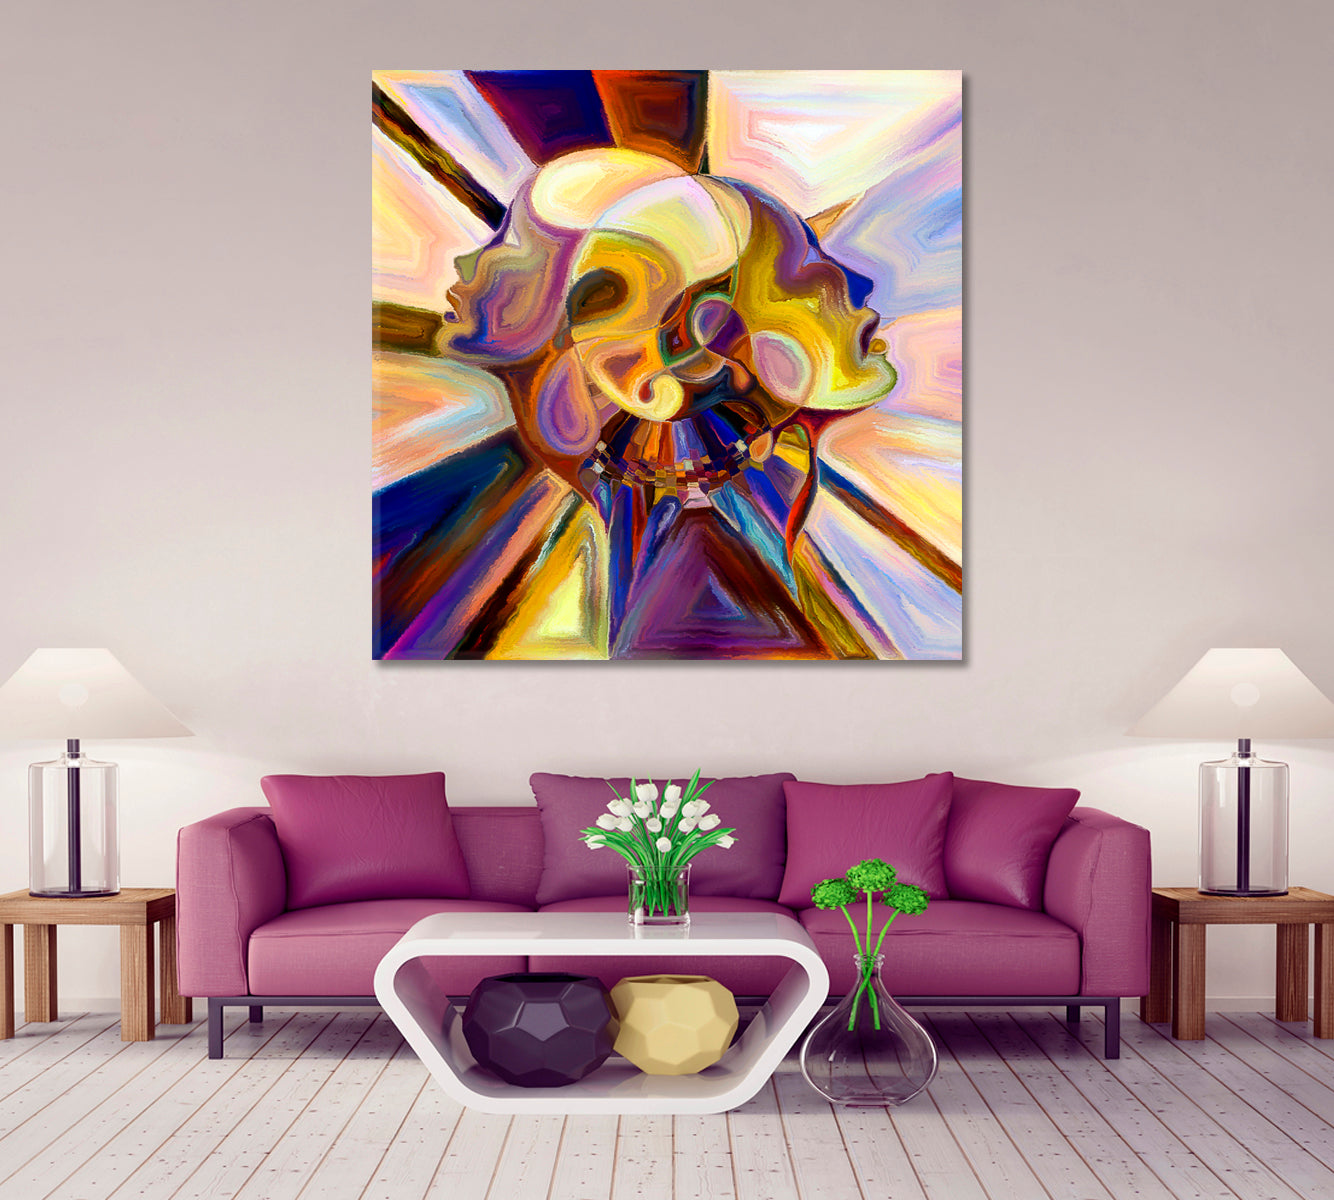 ABSTRACT FORMS Trendy Modern Wall Art | Square Panel Contemporary Art Artesty   